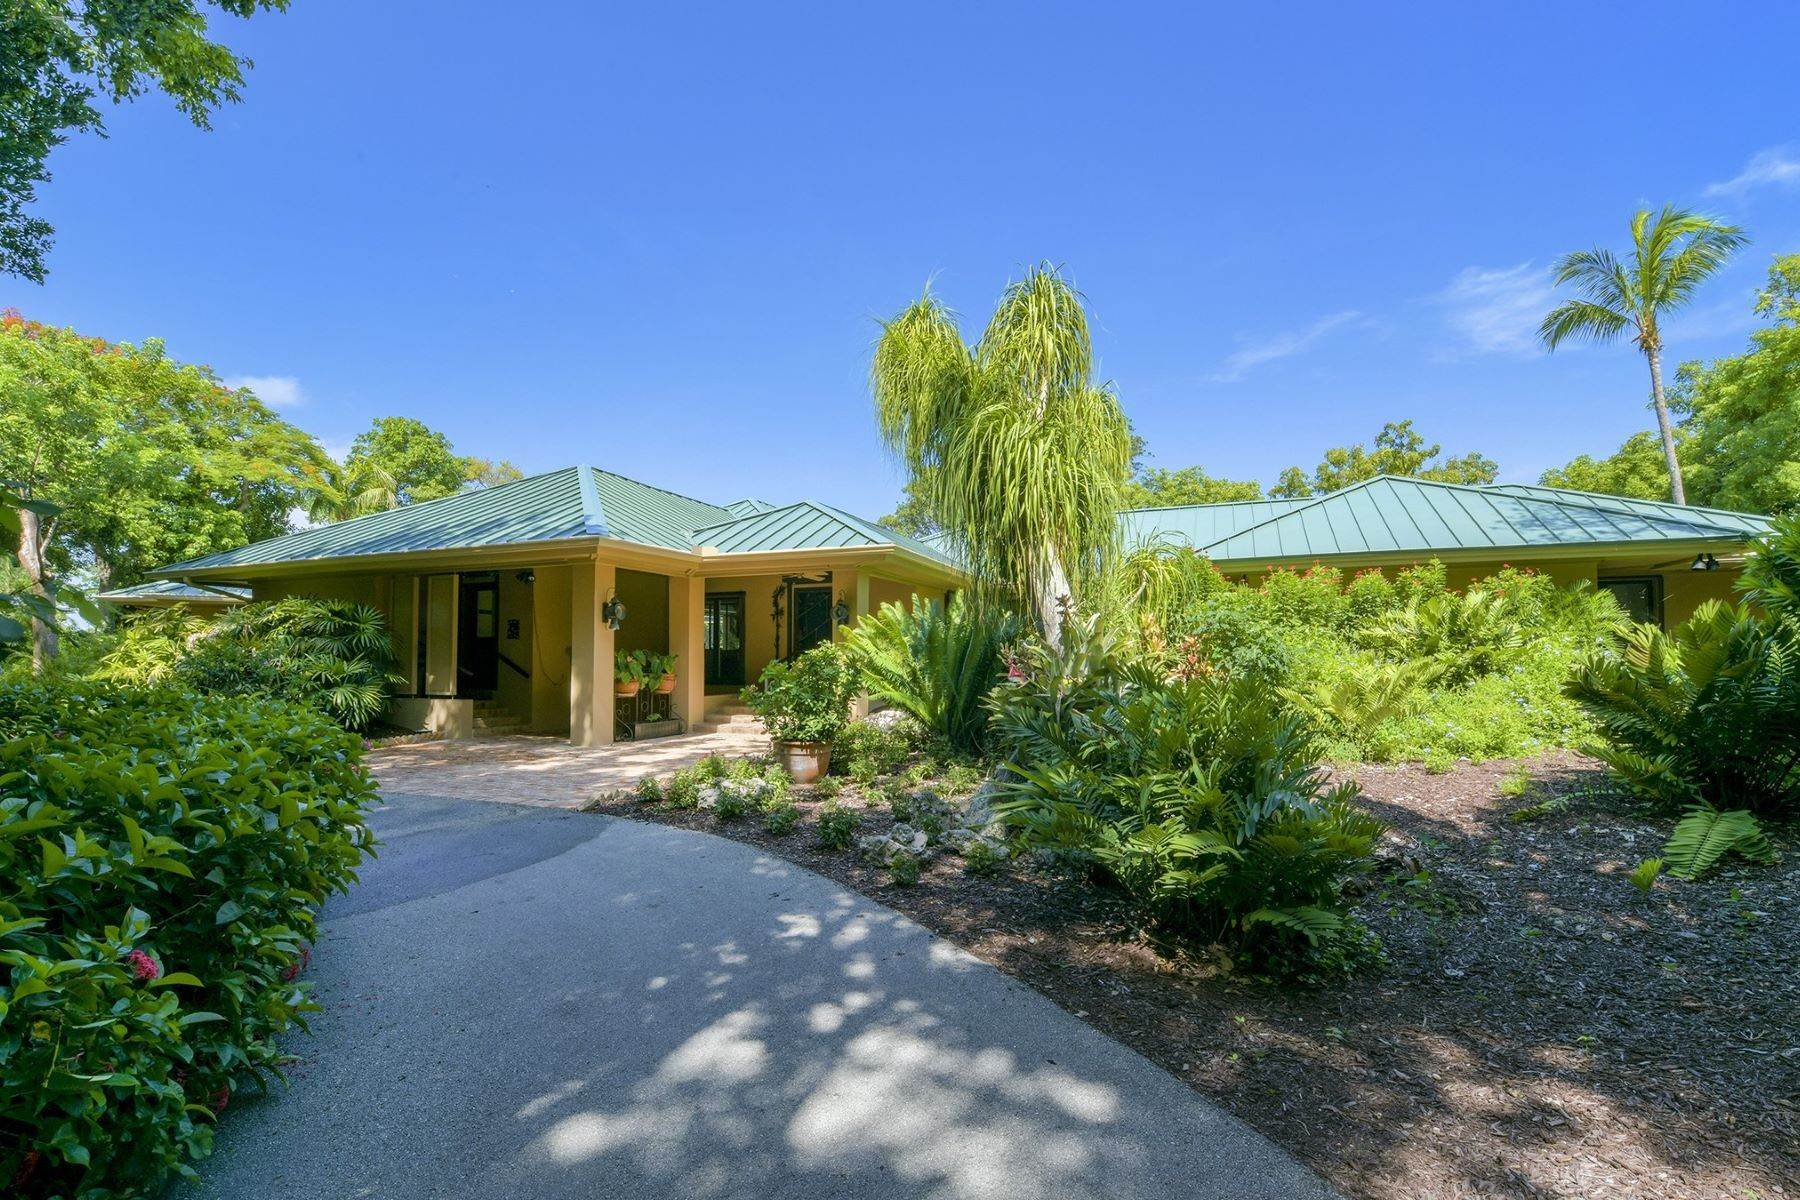 22. Property for Sale at Pumpkin Key 10 Cannon Point Key Largo, Florida 33037 United States